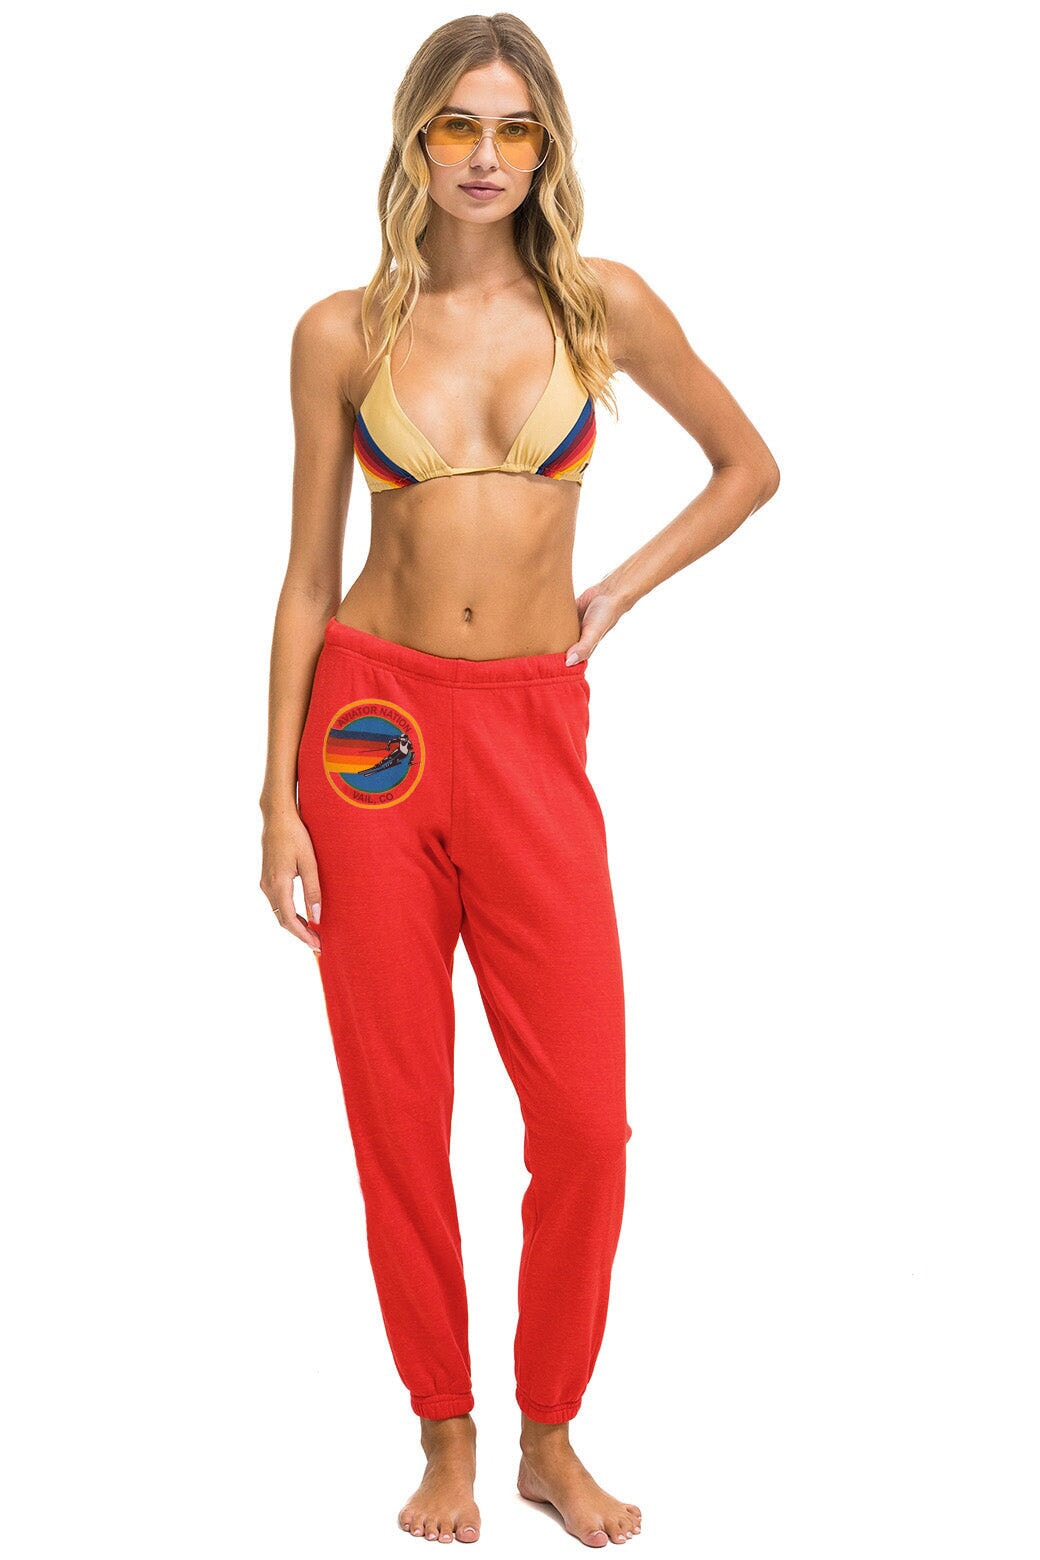 AVIATOR NATION VAIL SWEATPANTS - RED Women's Sweatpants Aviator Nation 